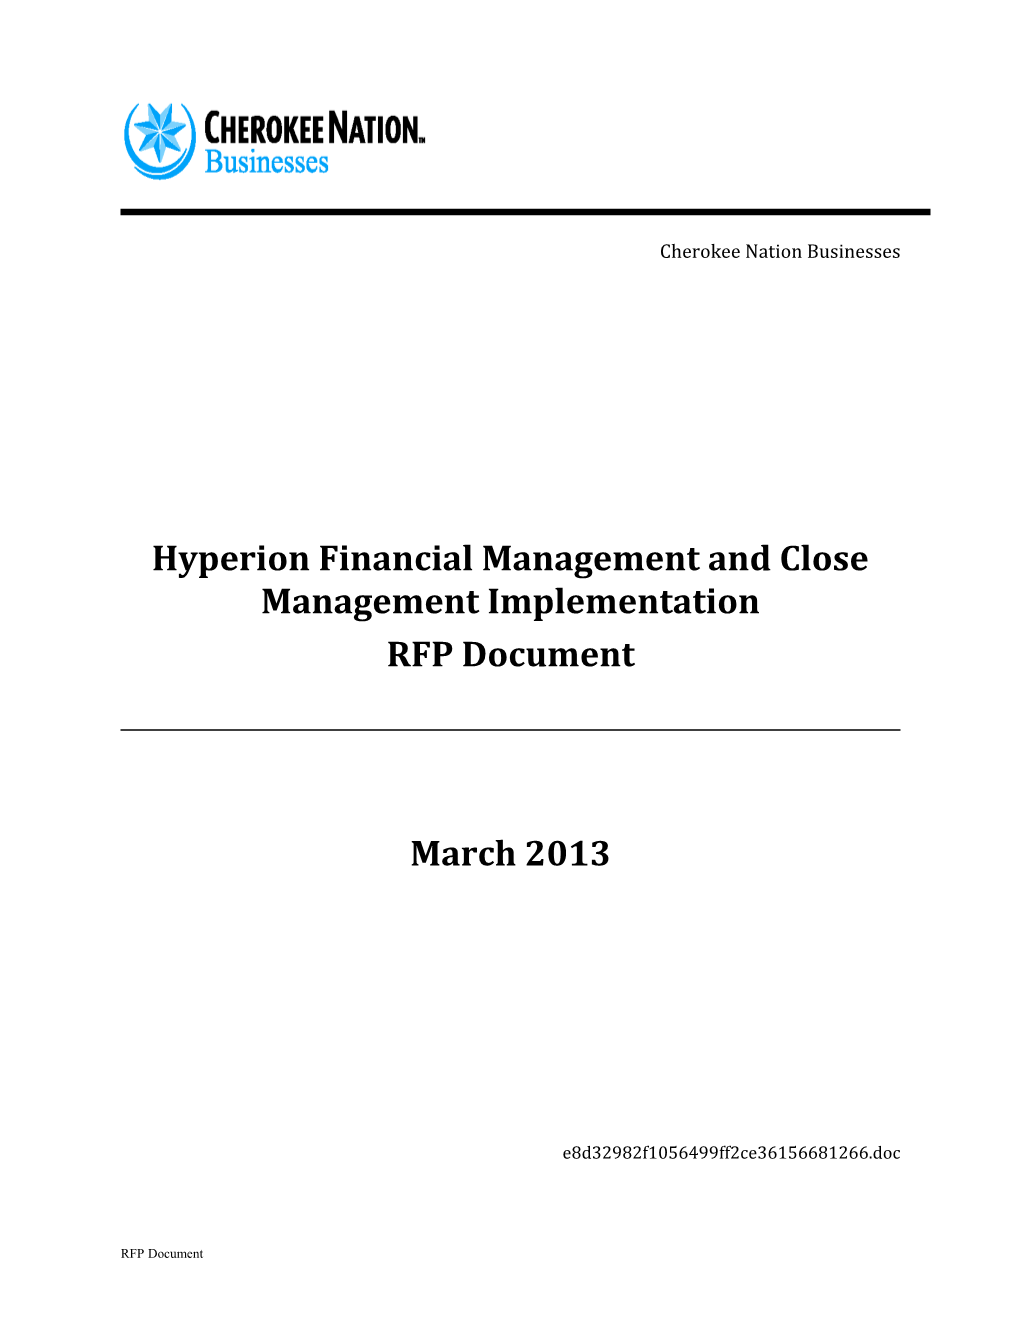 Hyperion Financial Management and Close Managementimplementation